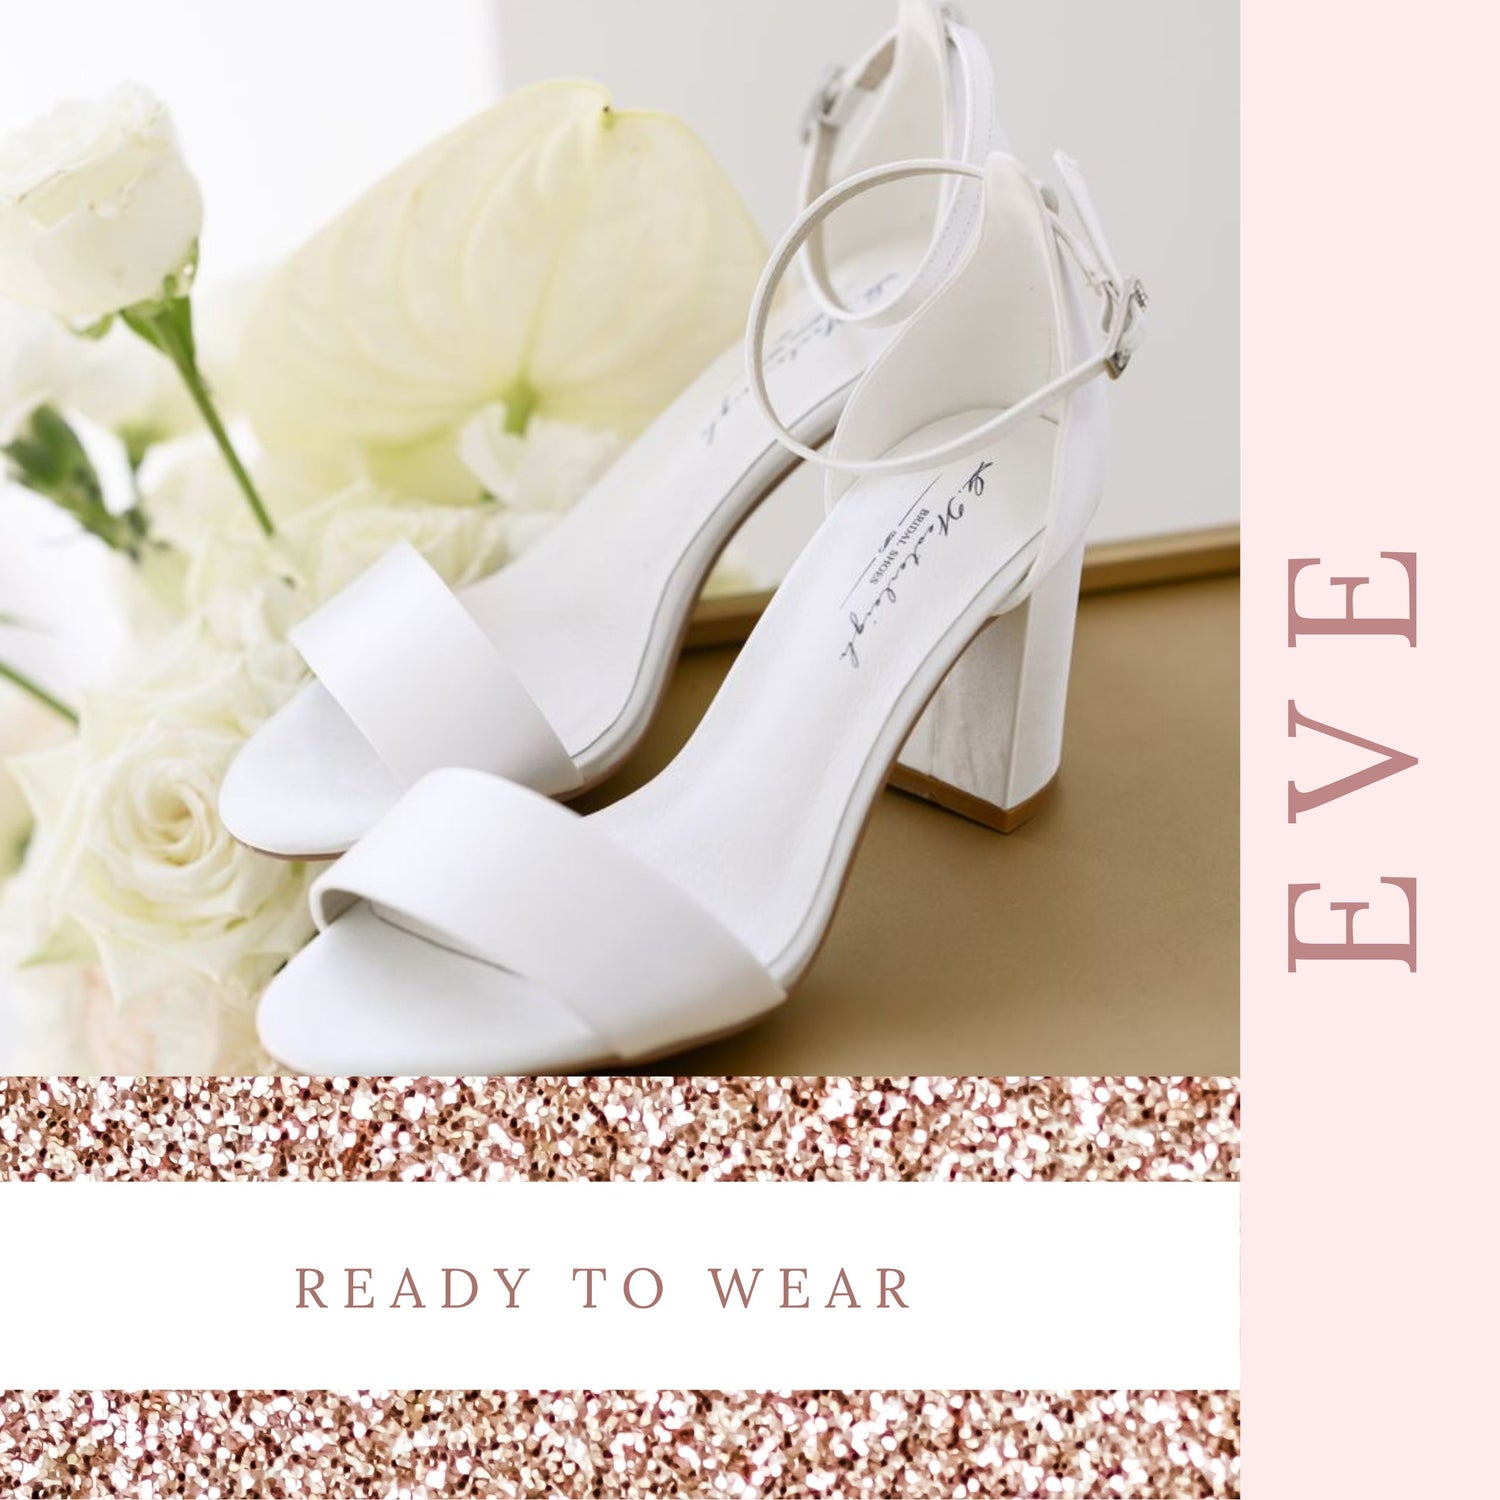 Different Types of Heels for Women - The Ultimate Guide to Heel Styles!